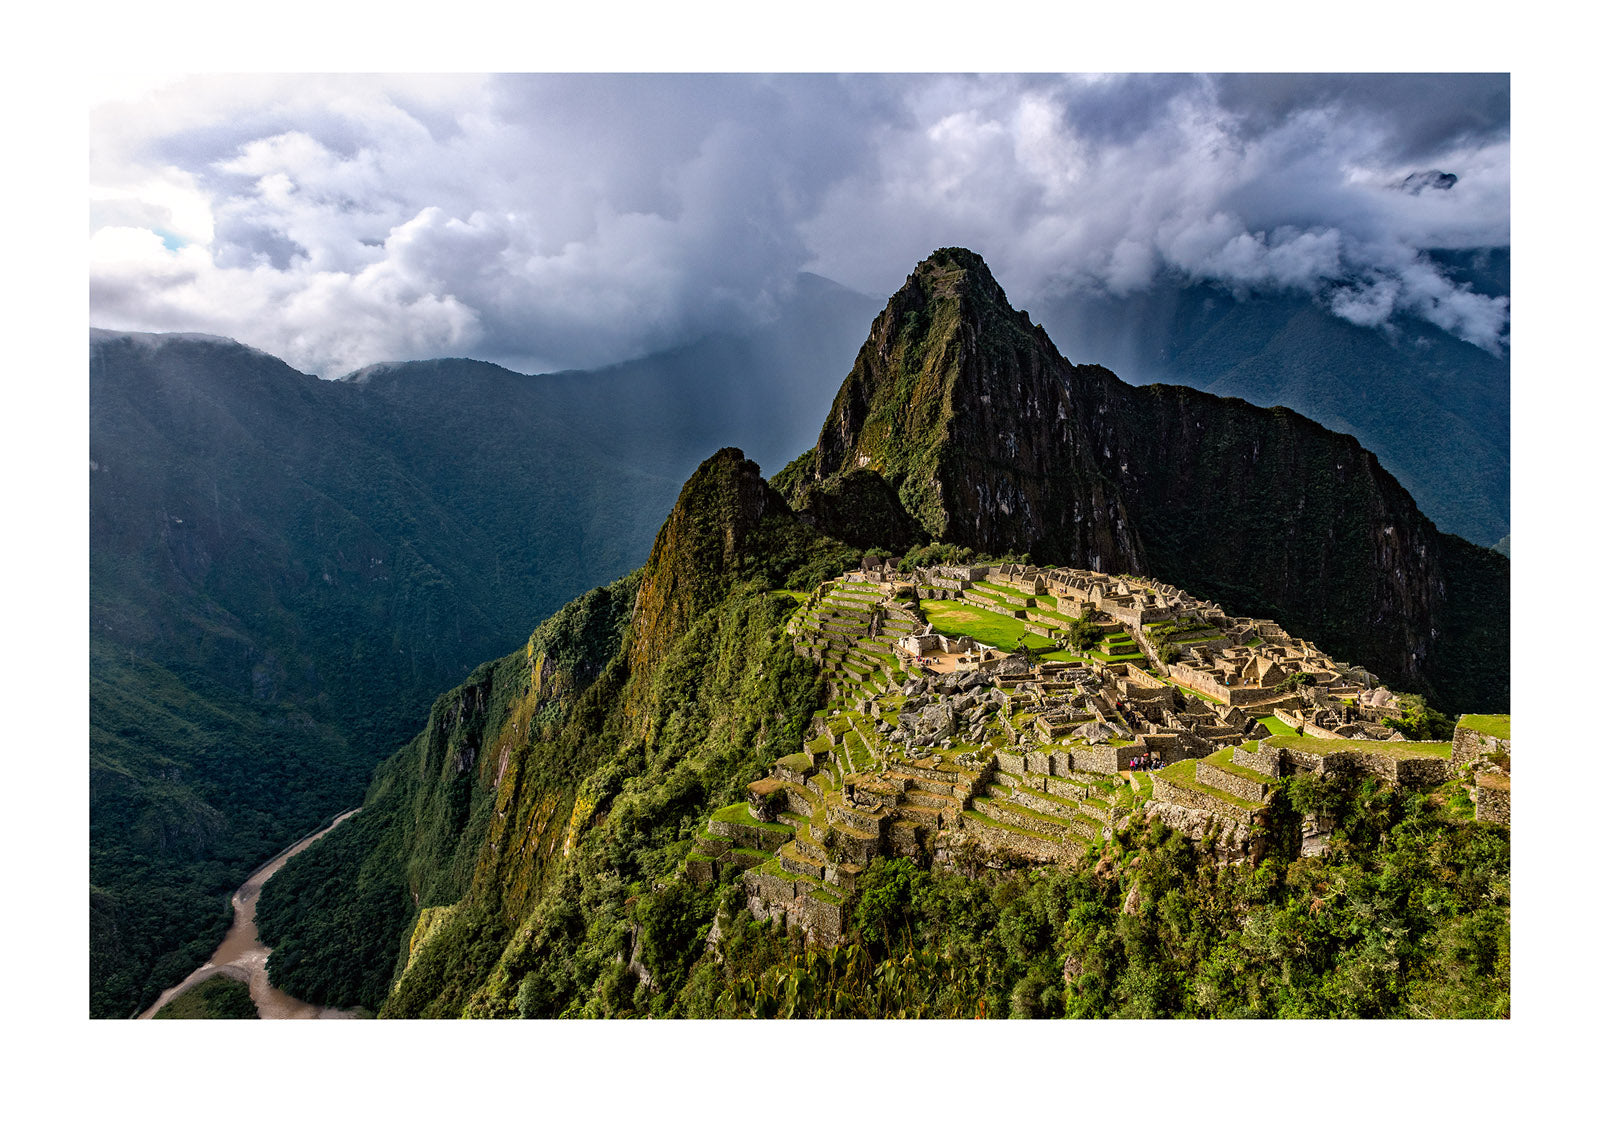 Machu Picchu. On a rain and mist filled day I decided to gamble my last hours to see if the sun would peer through a gap in the clouds. Minutes before the gates closed, I was given a single ray that illuminated the ancient ruins.  Peru.